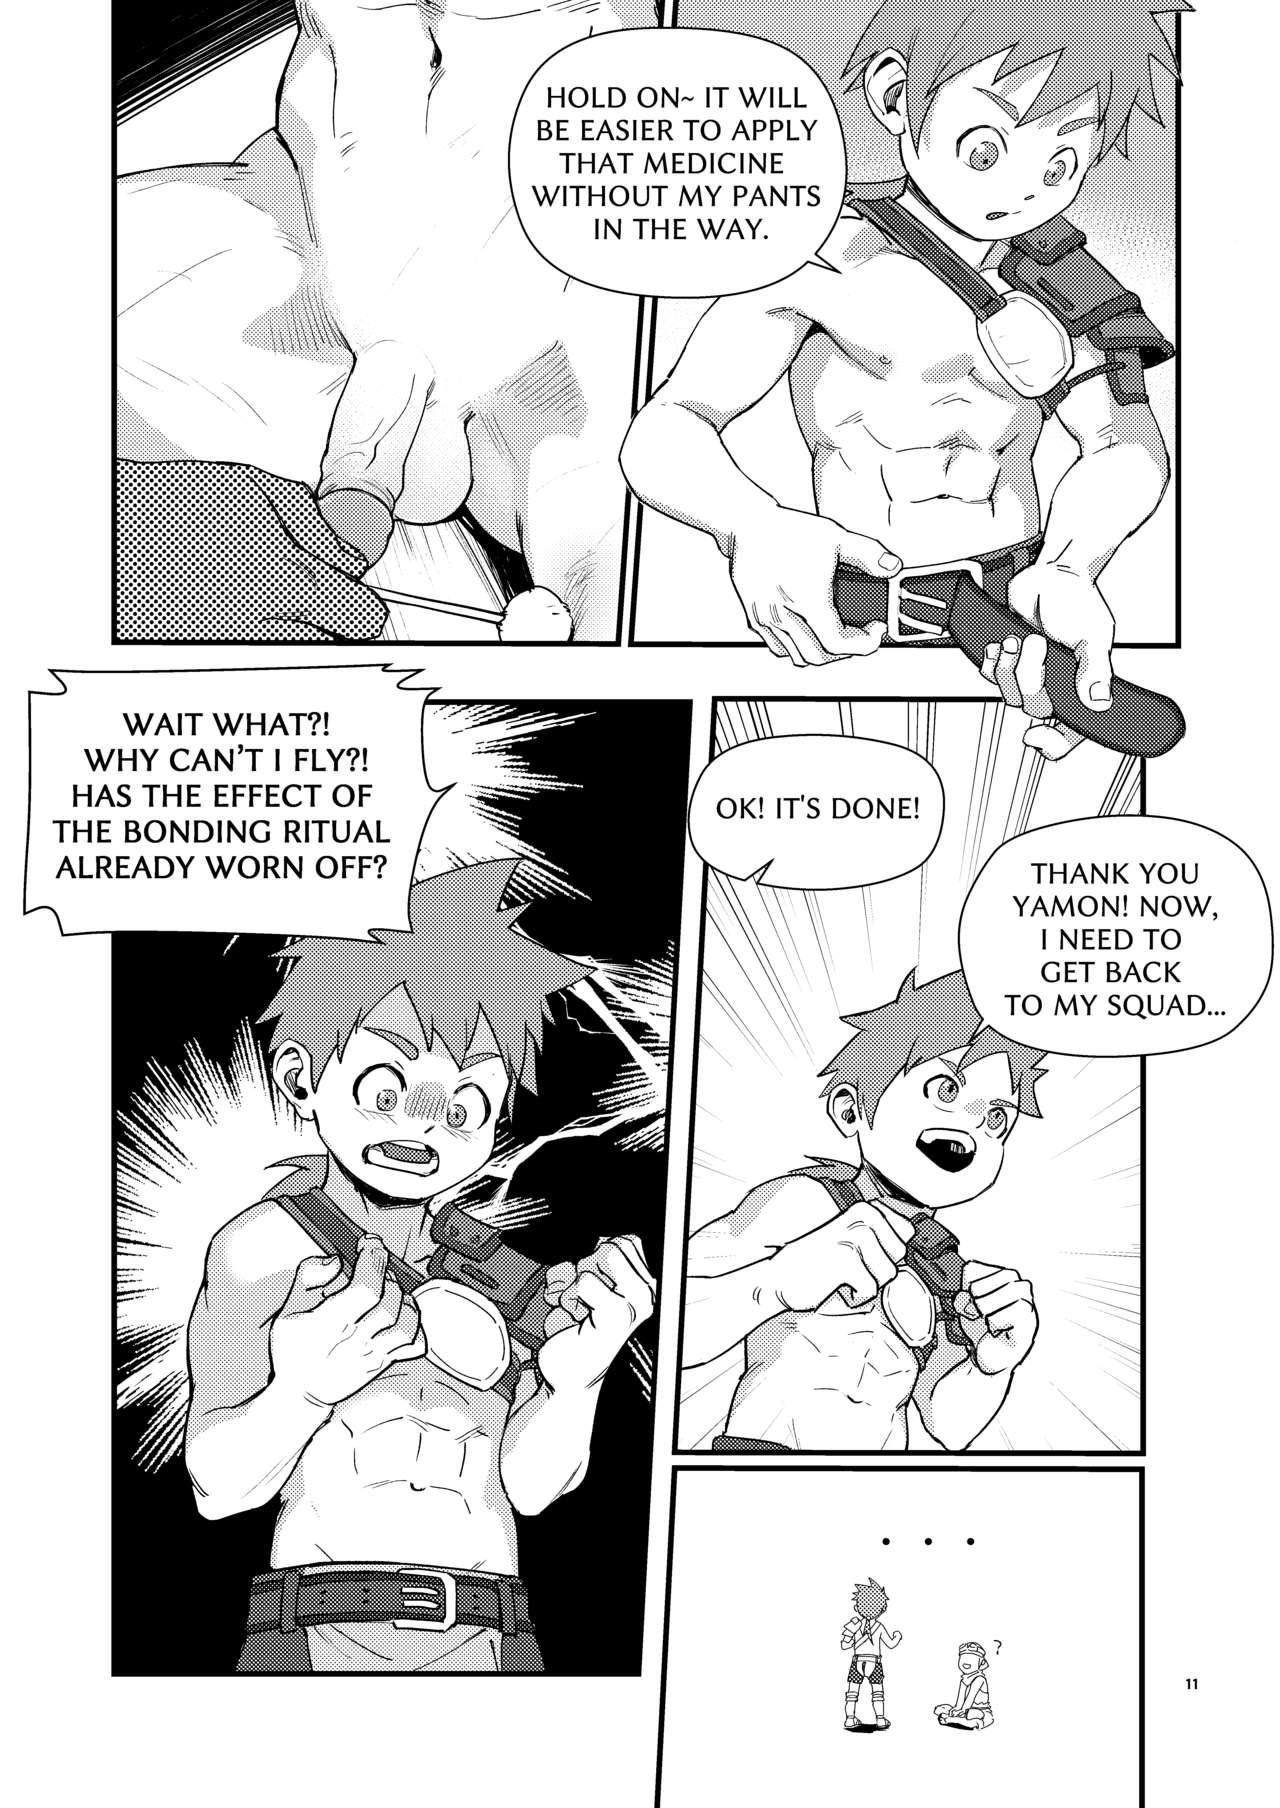 Red Head Above the Clouds - Original Bush - Page 11